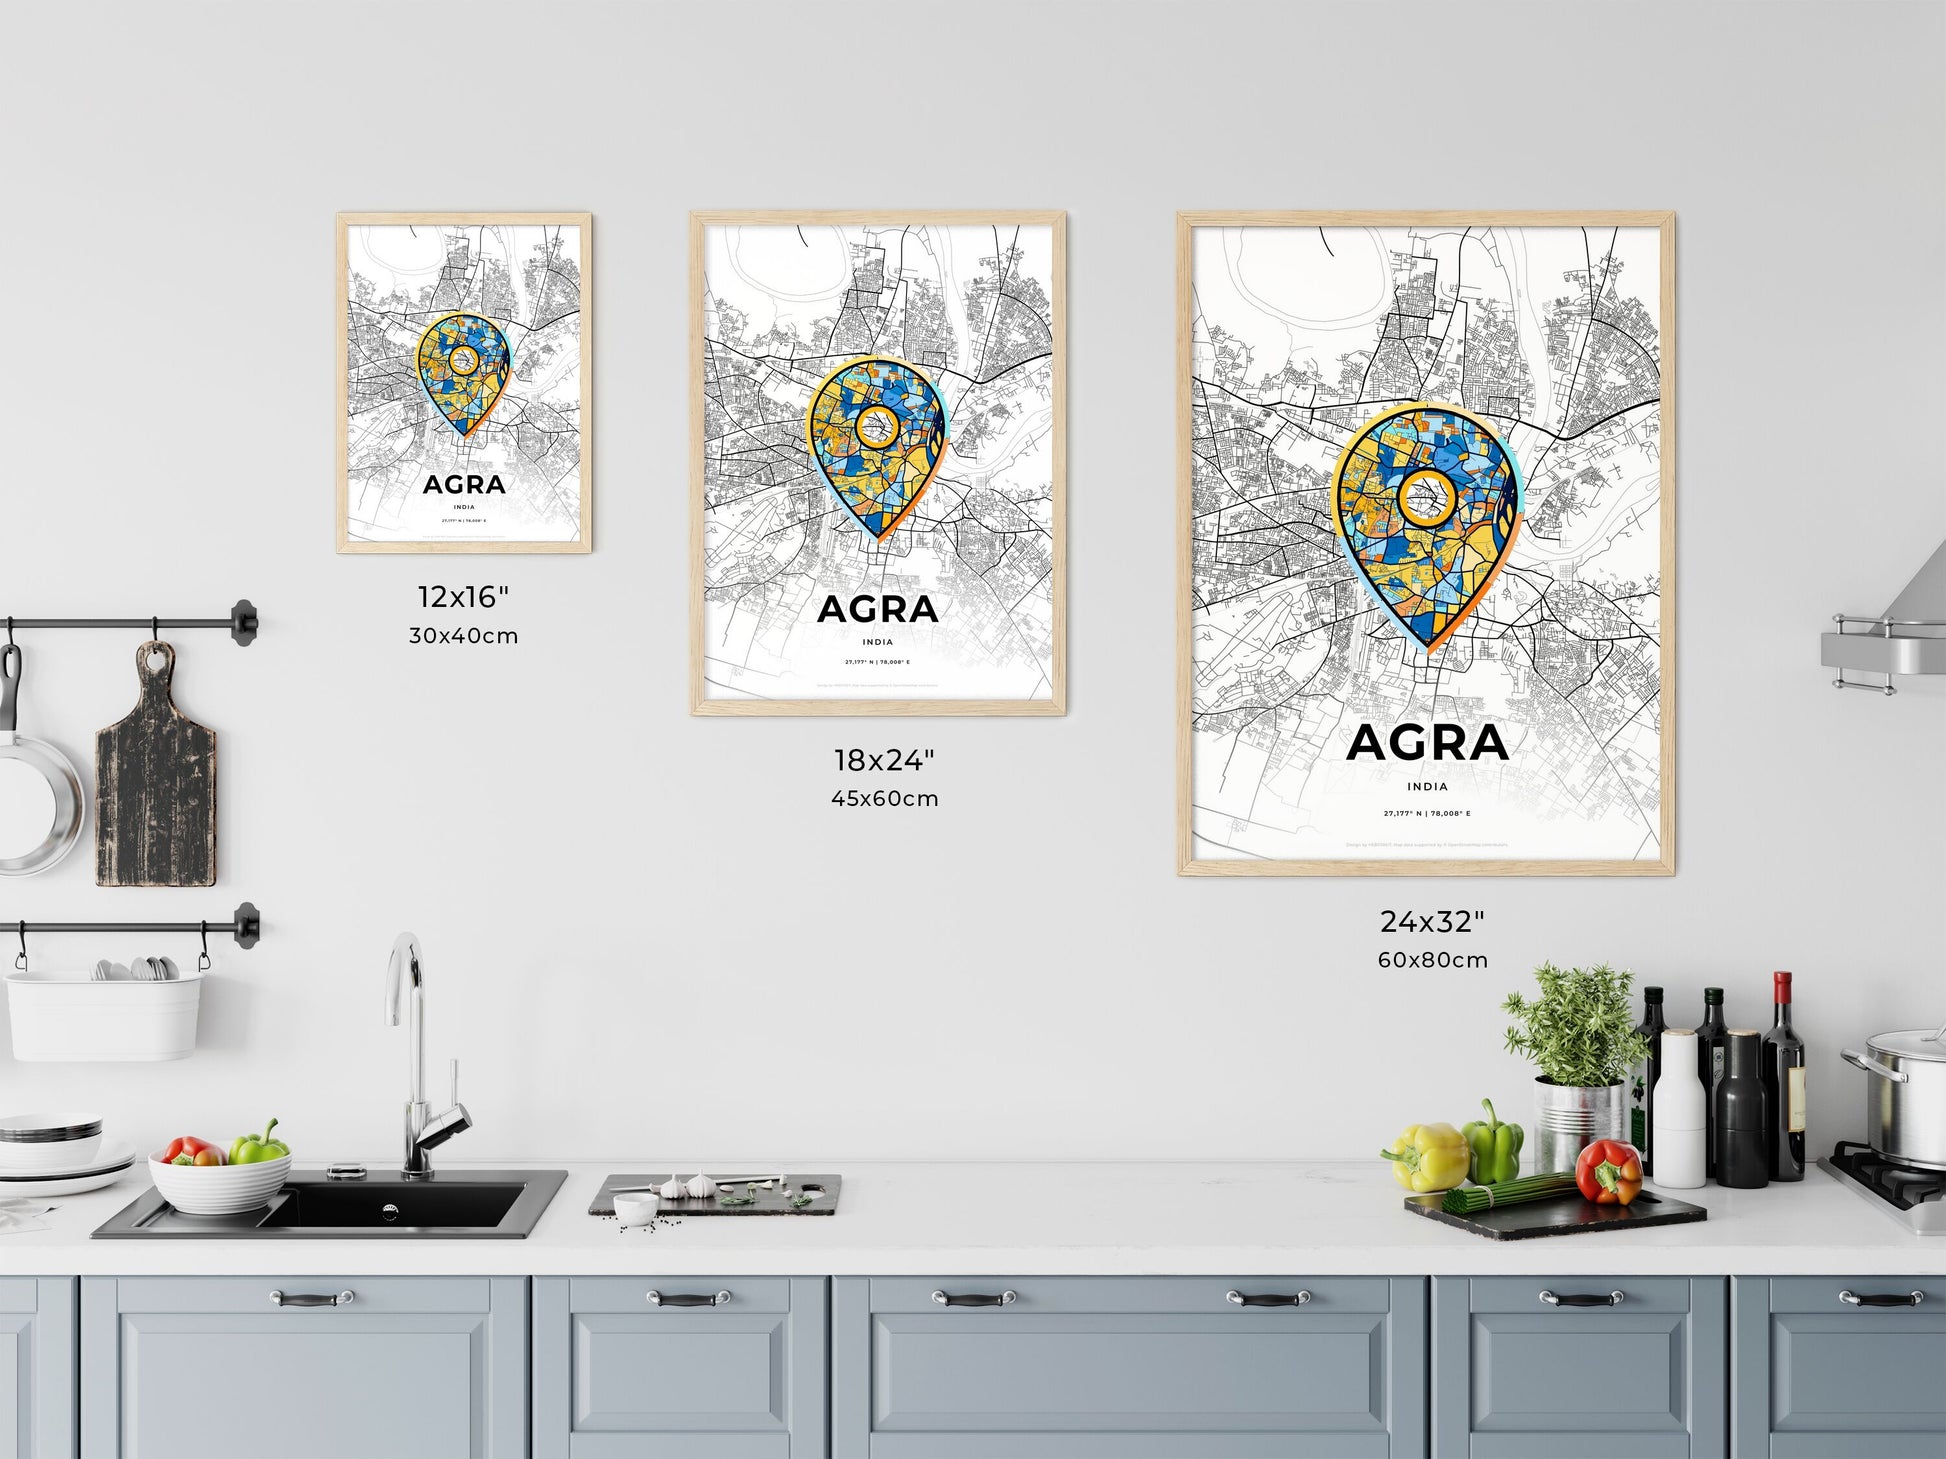 AGRA INDIA minimal art map with a colorful icon. Where it all began, Couple map gift.